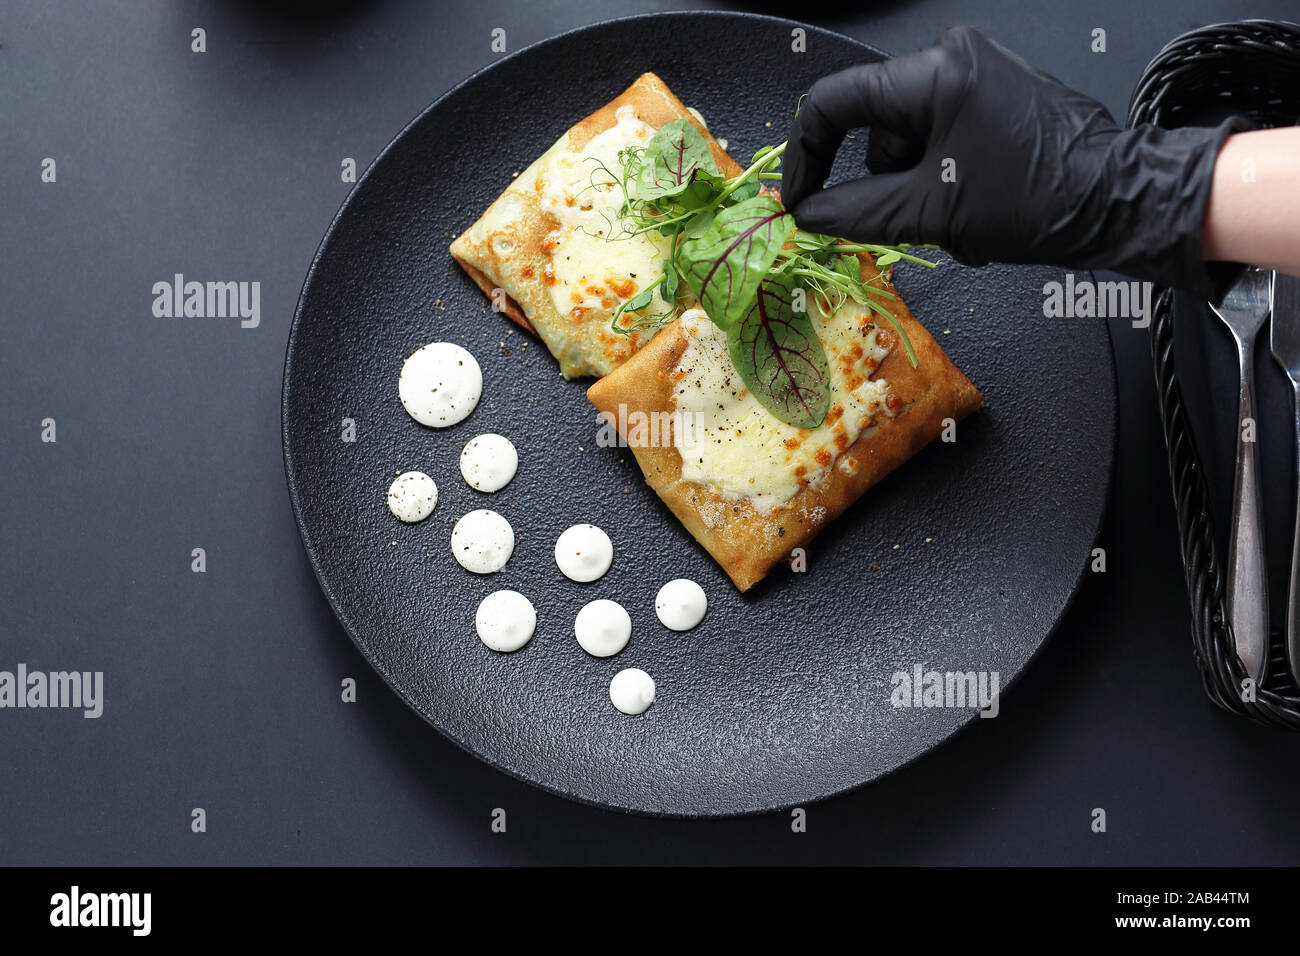 The chef decorates the plate. Serving and decorating the dish. Stock Photo